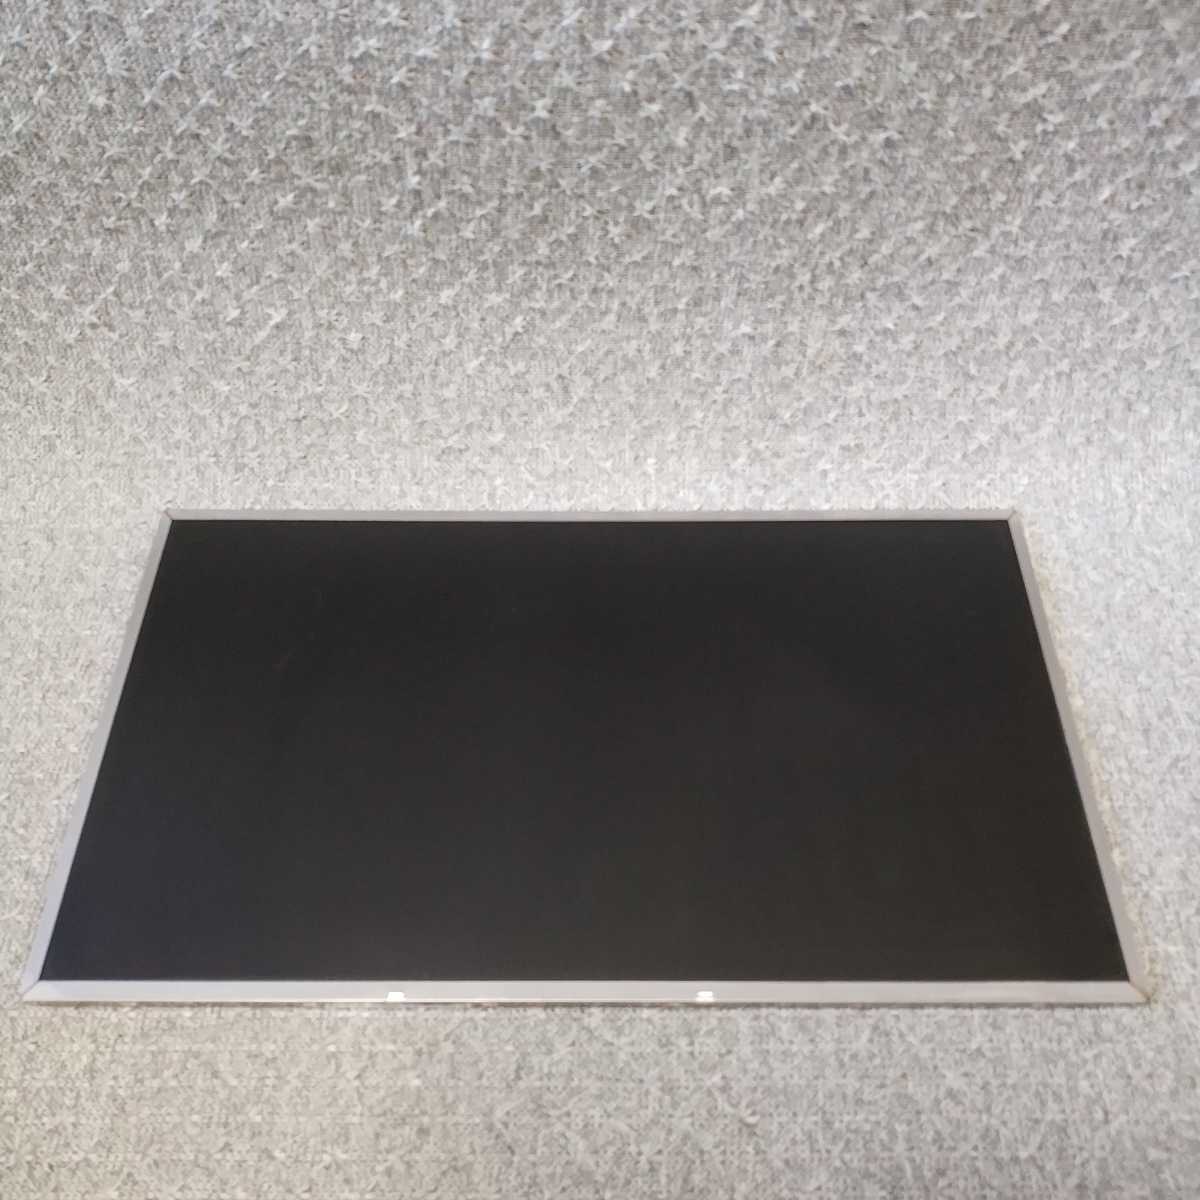  Gifu the same day departure special delivery * SAMSUNG 15.6 inch liquid crystal panel * LTN156AT05 -701 1366x768 40pin non lustre used * operation verification settled E372